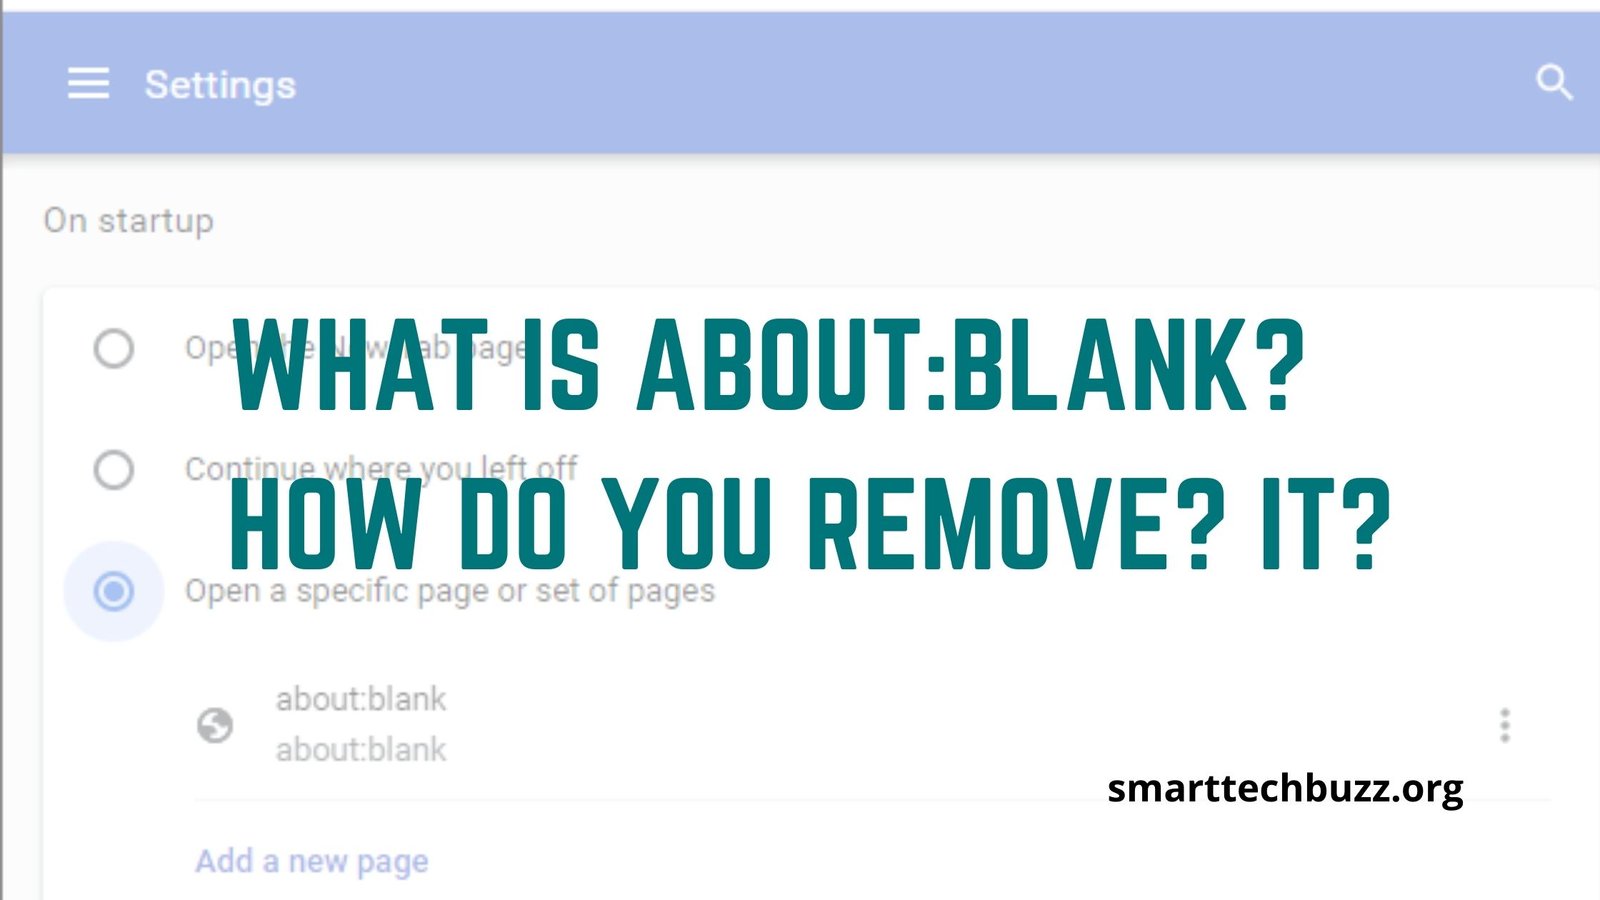 About:blank. Blank meaning